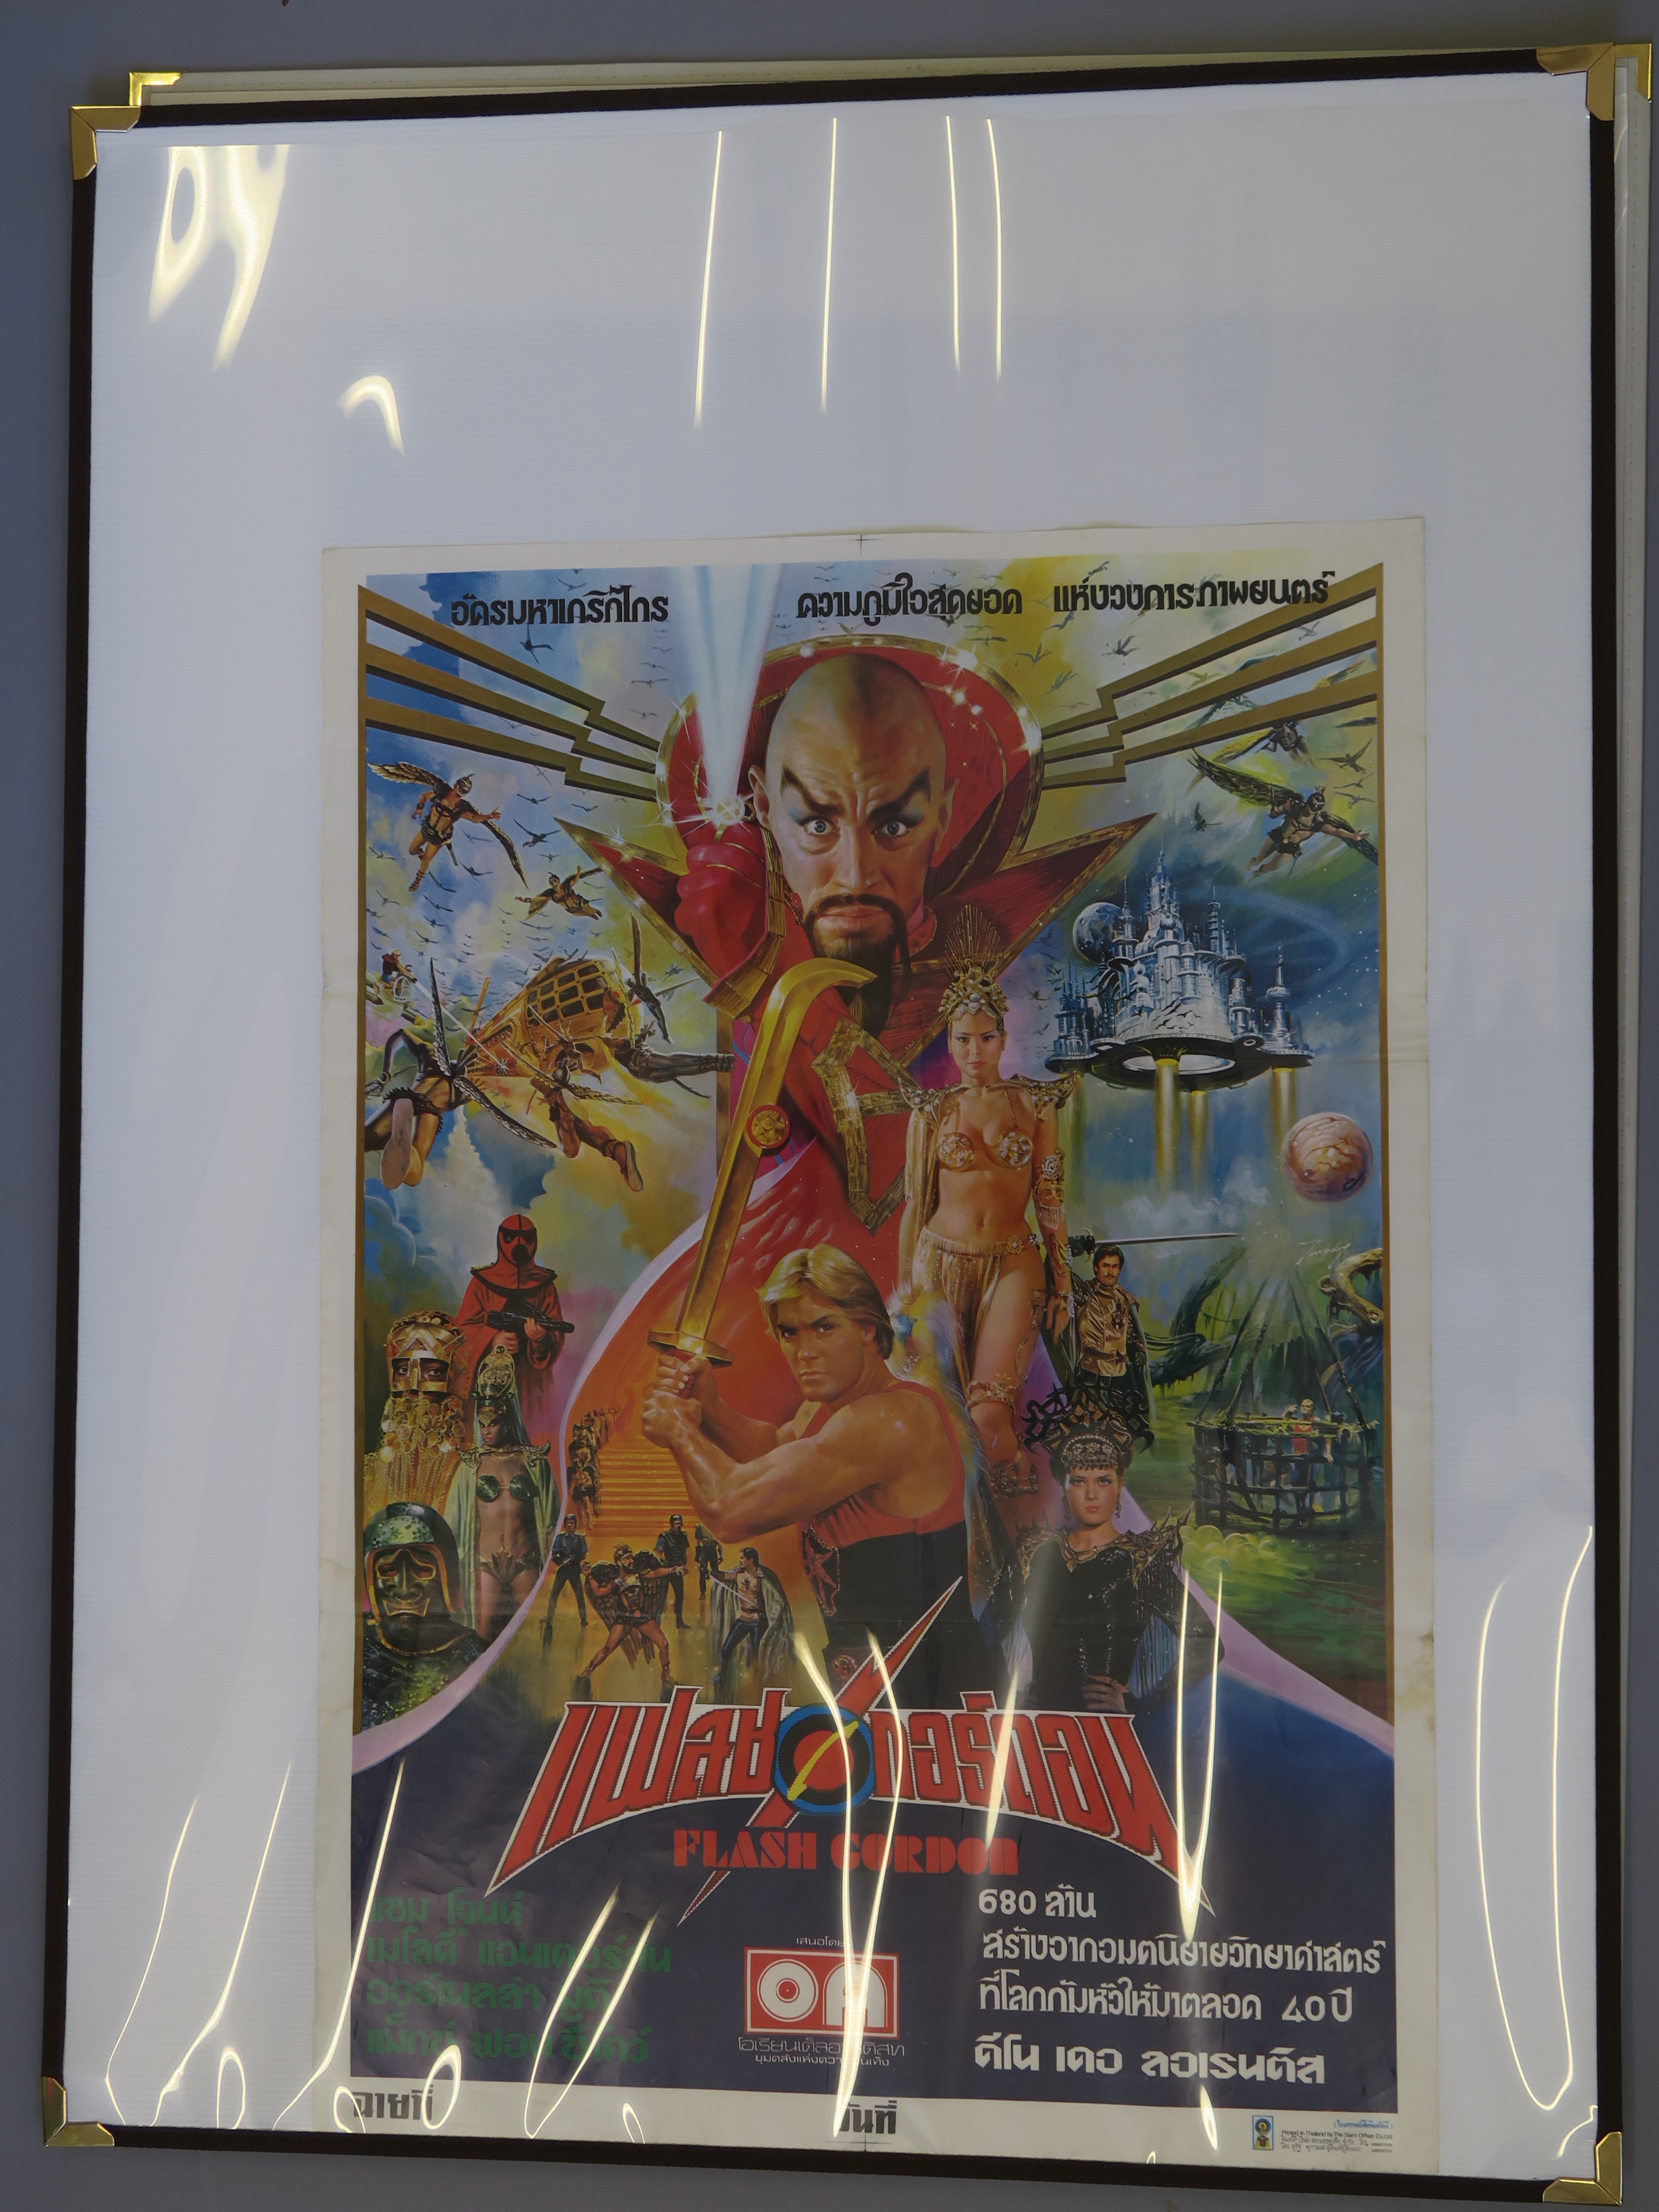 10 Selwyn browsers 30 x 40 inch for one sheets inc posters for Lord of the Rings, Flash Gordon, - Image 2 of 6